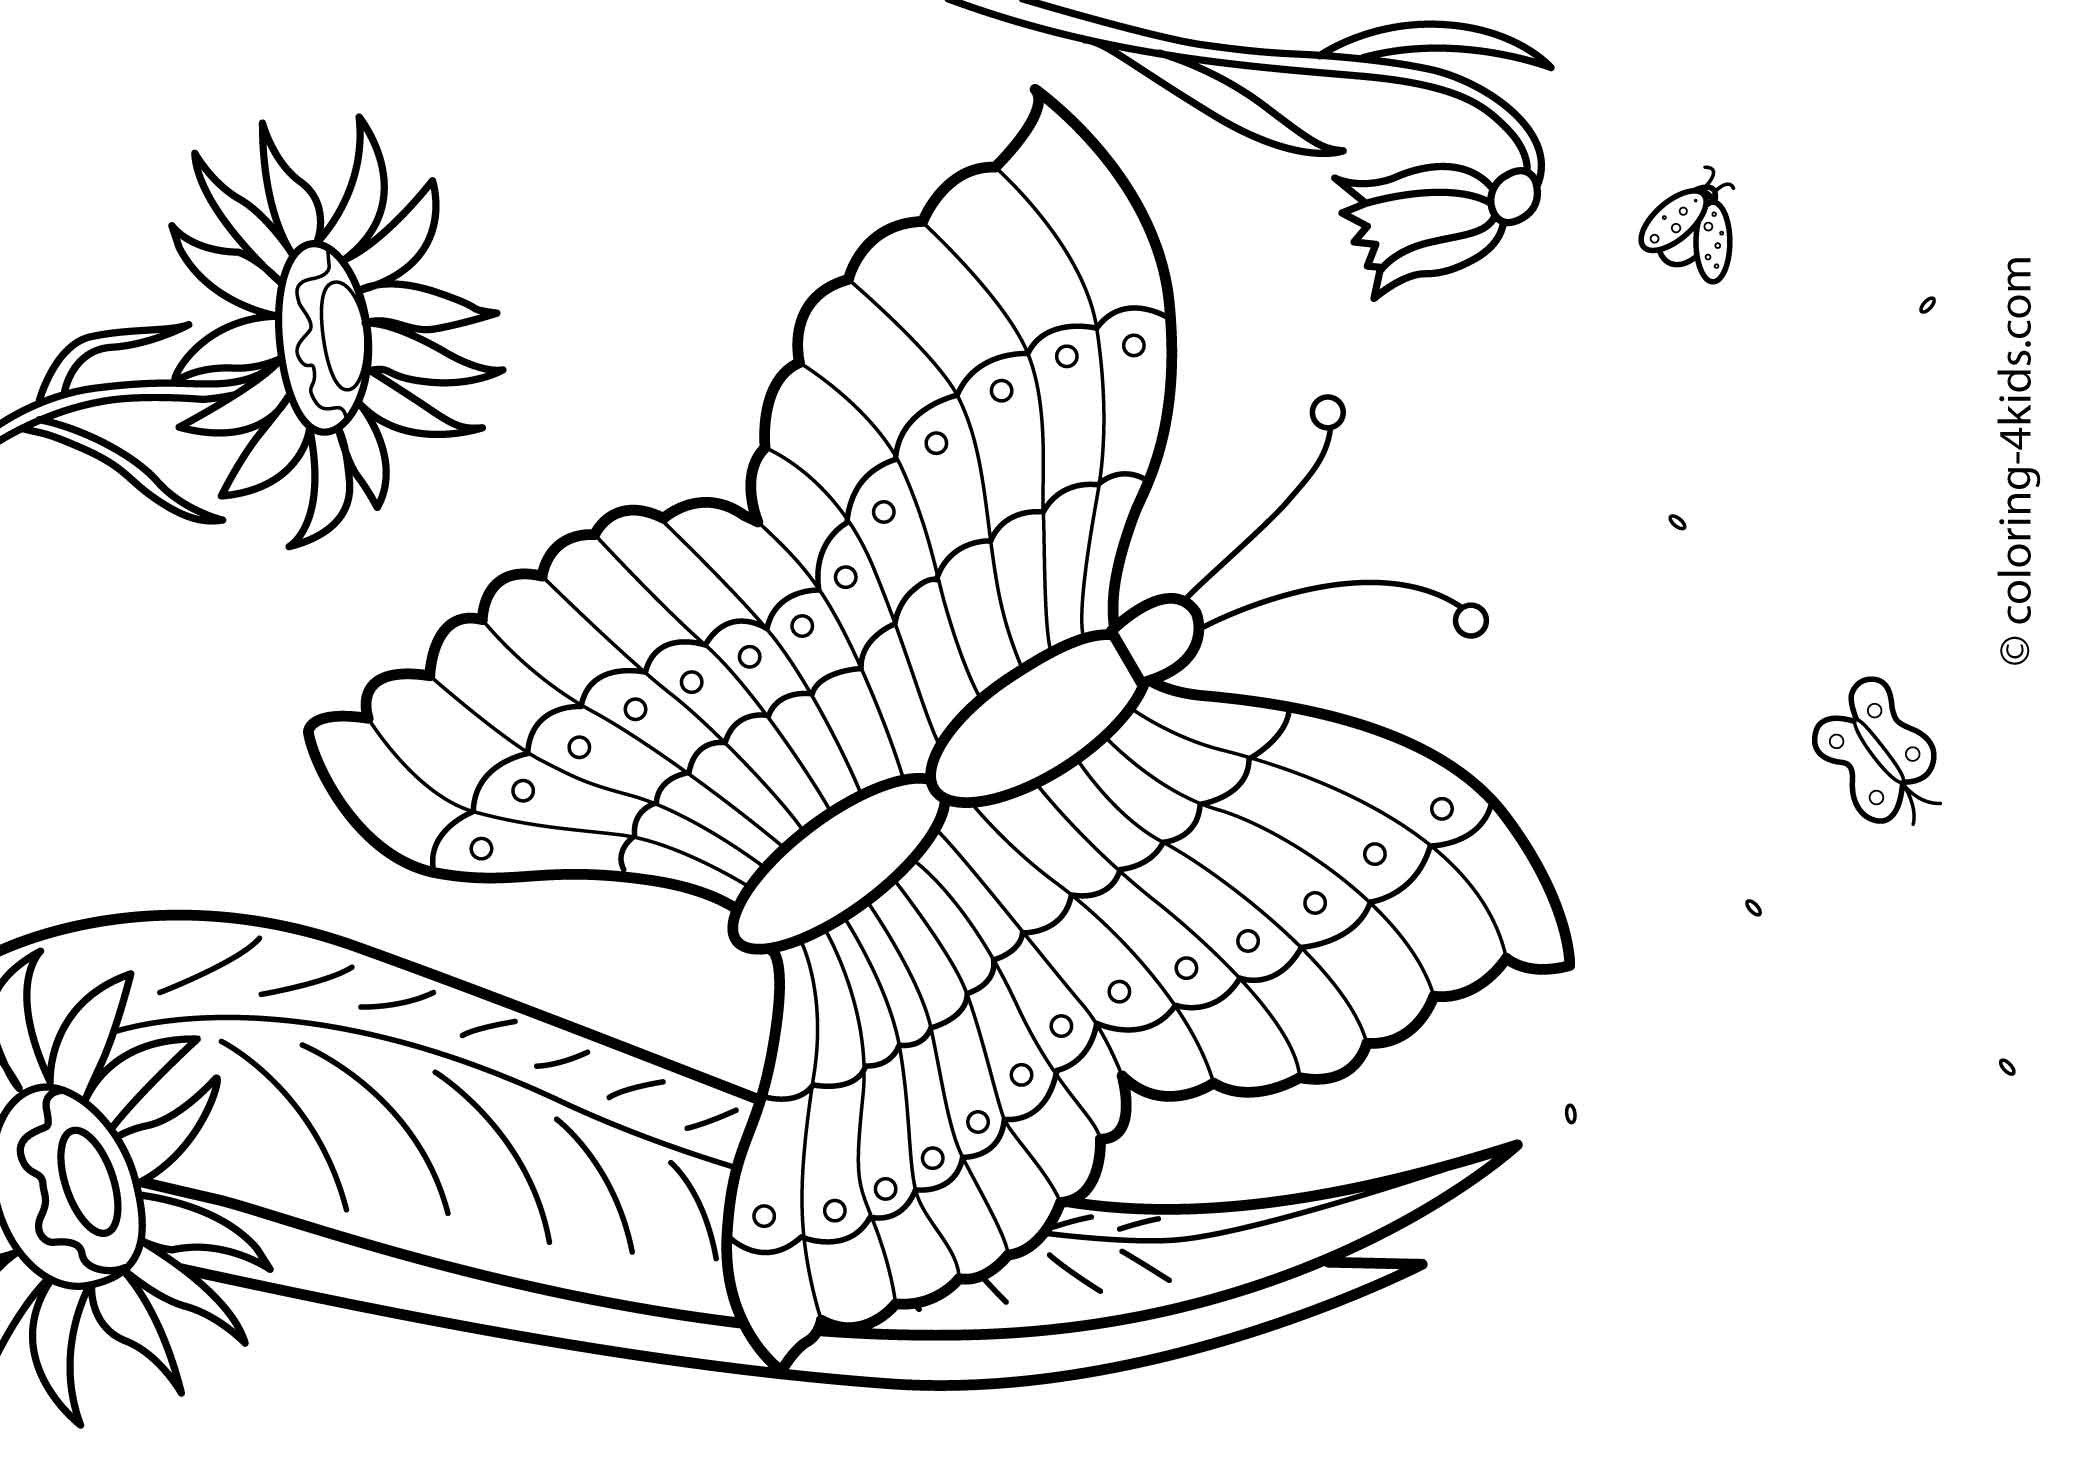 Printable Coloring Pages Summer
 27 Summer season coloring pages part 2